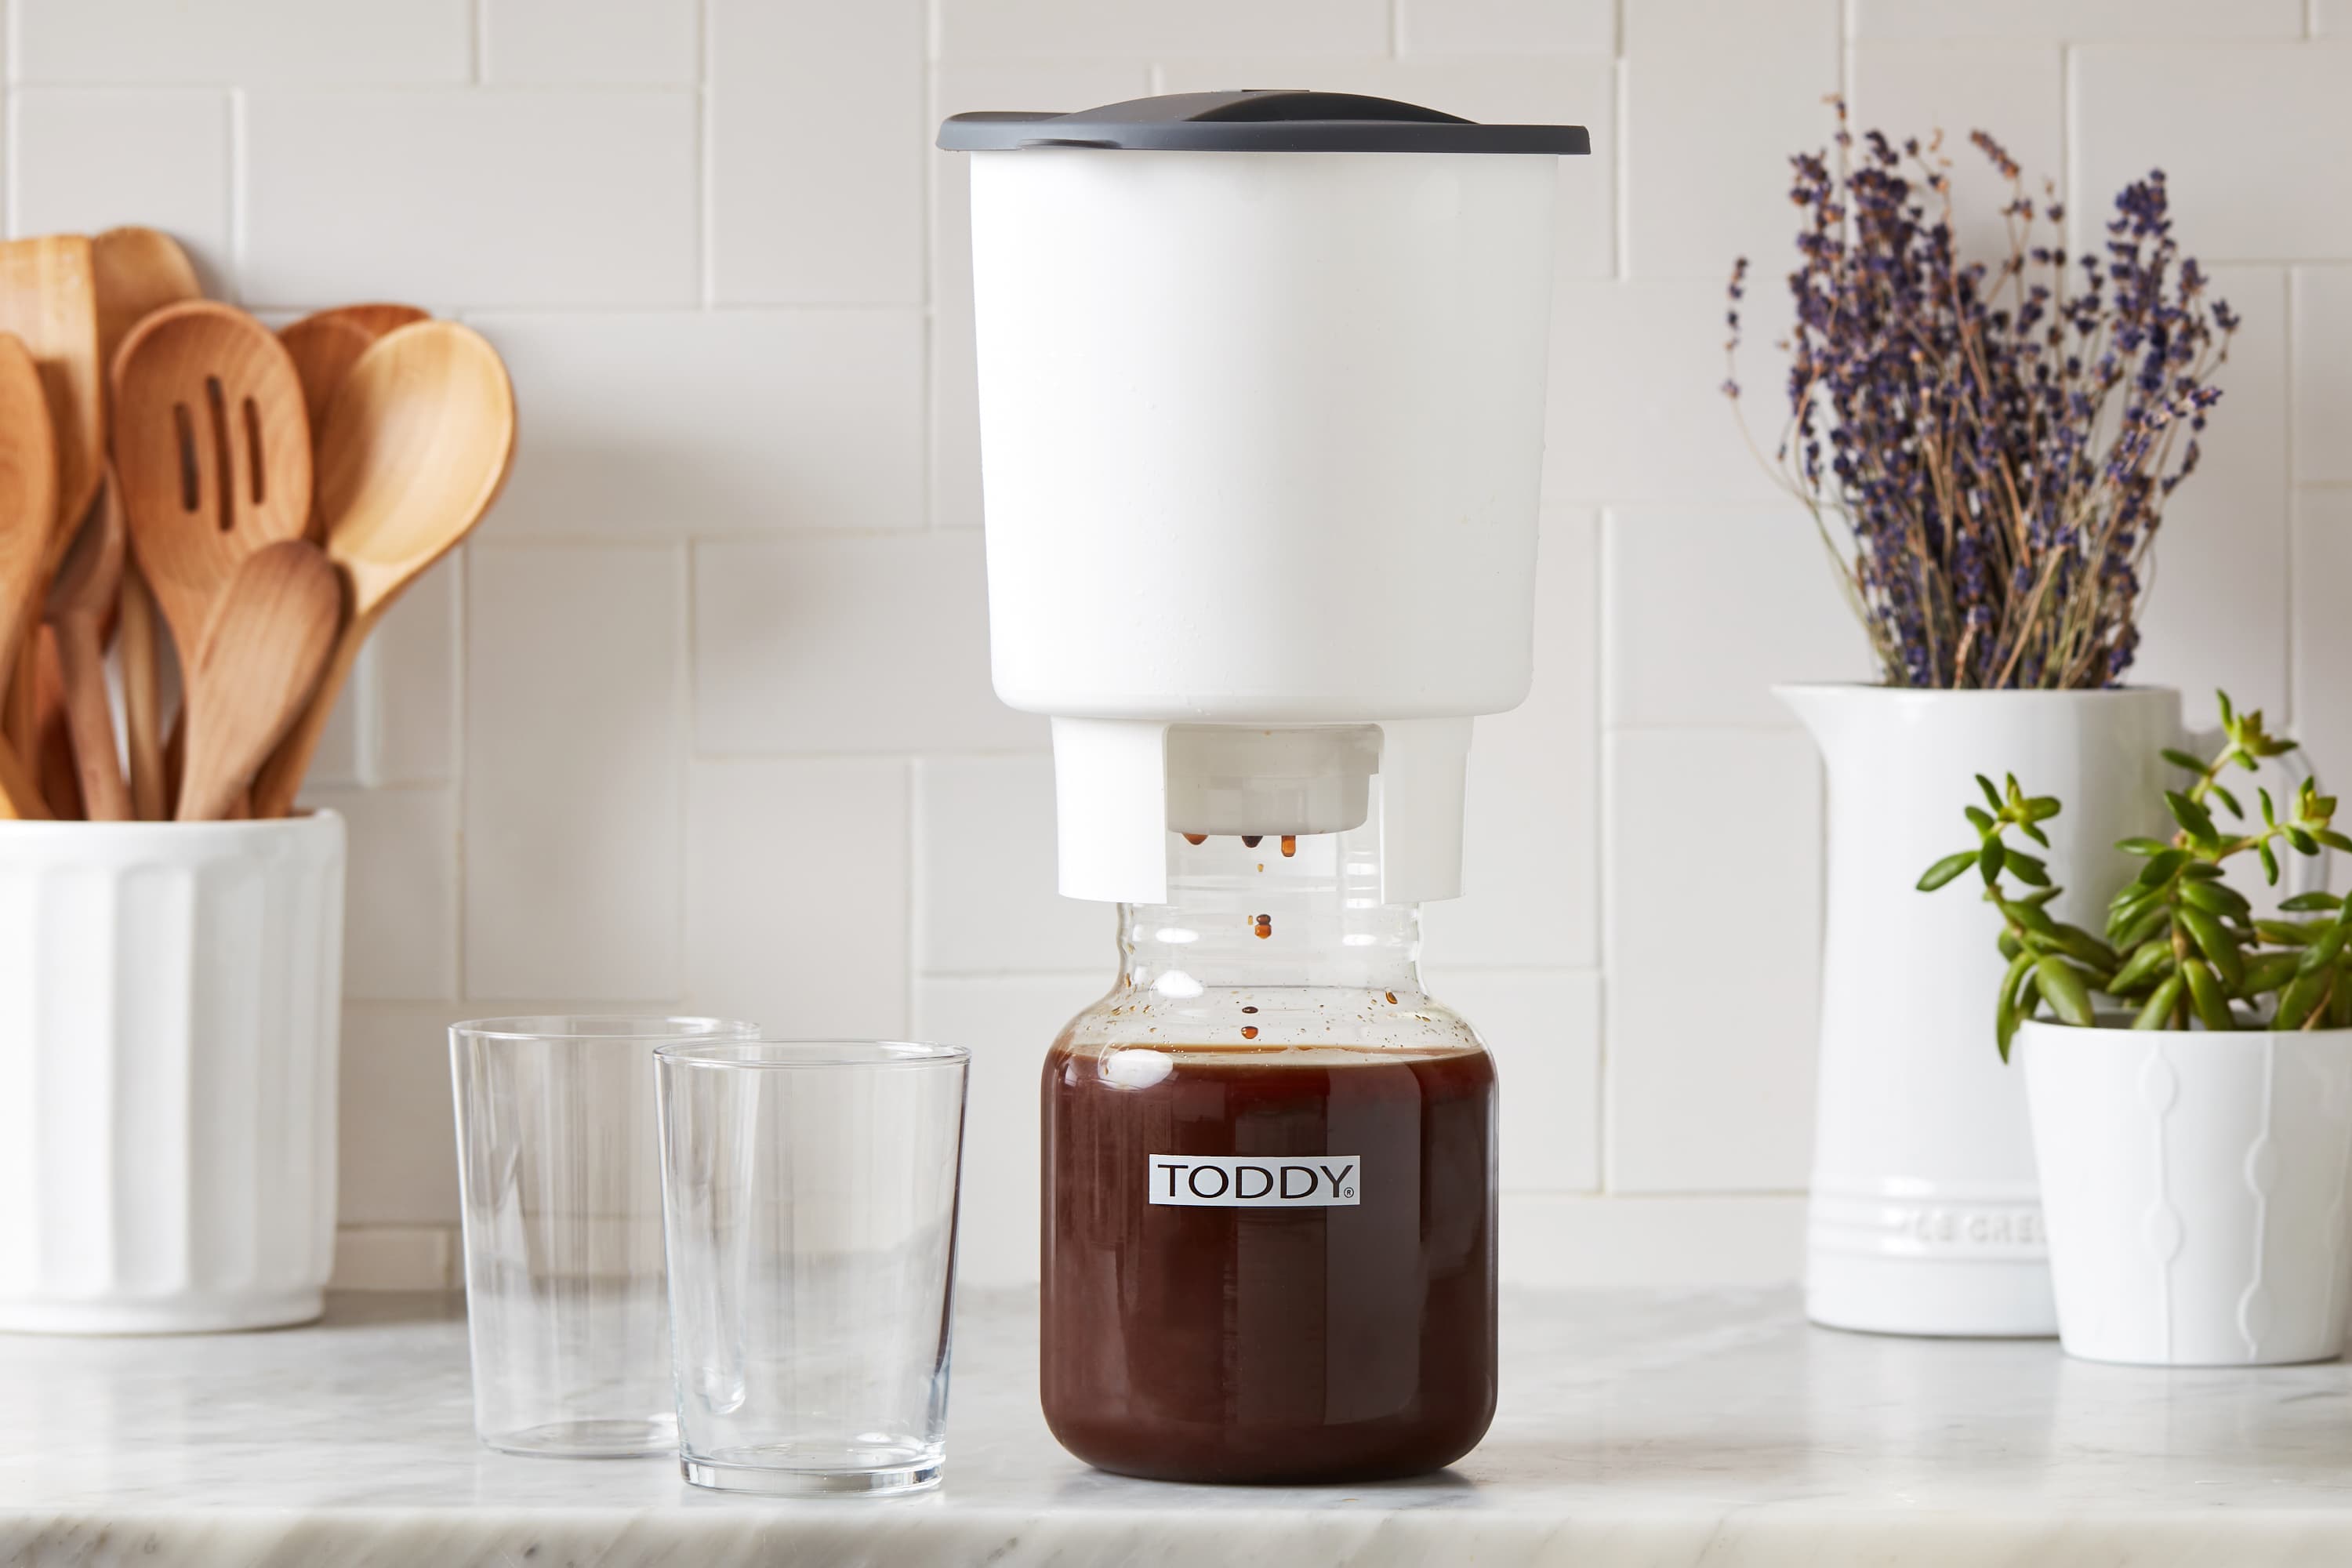 Toddy Home Model Cold Brew Coffee Maker Set